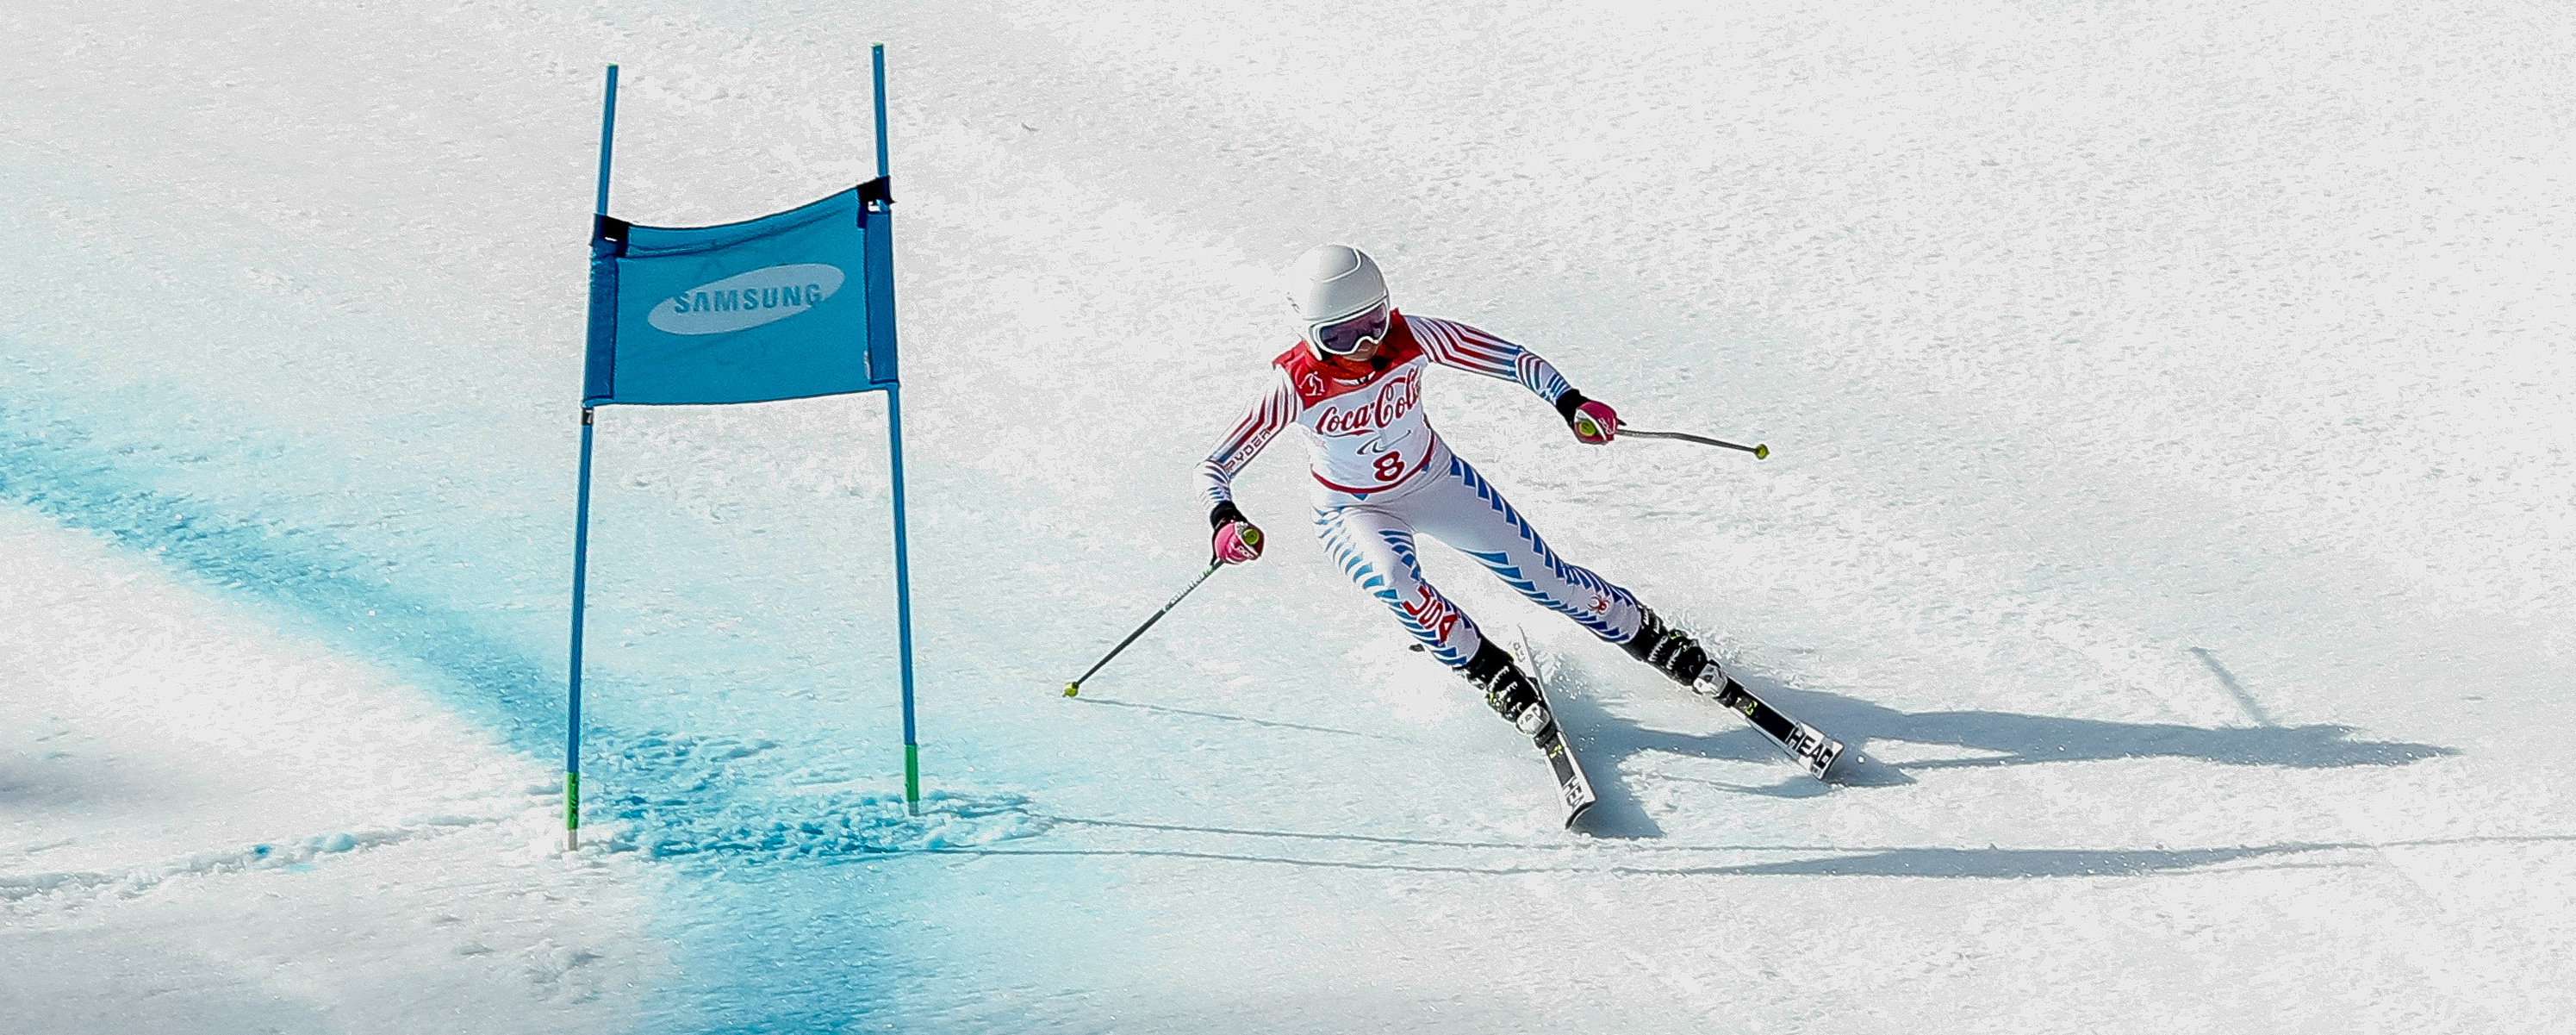 Danelle Umstead competes in the Women's Super Combined, Visually Impaired event during the 2018 Paralympic Games in PyeongChang